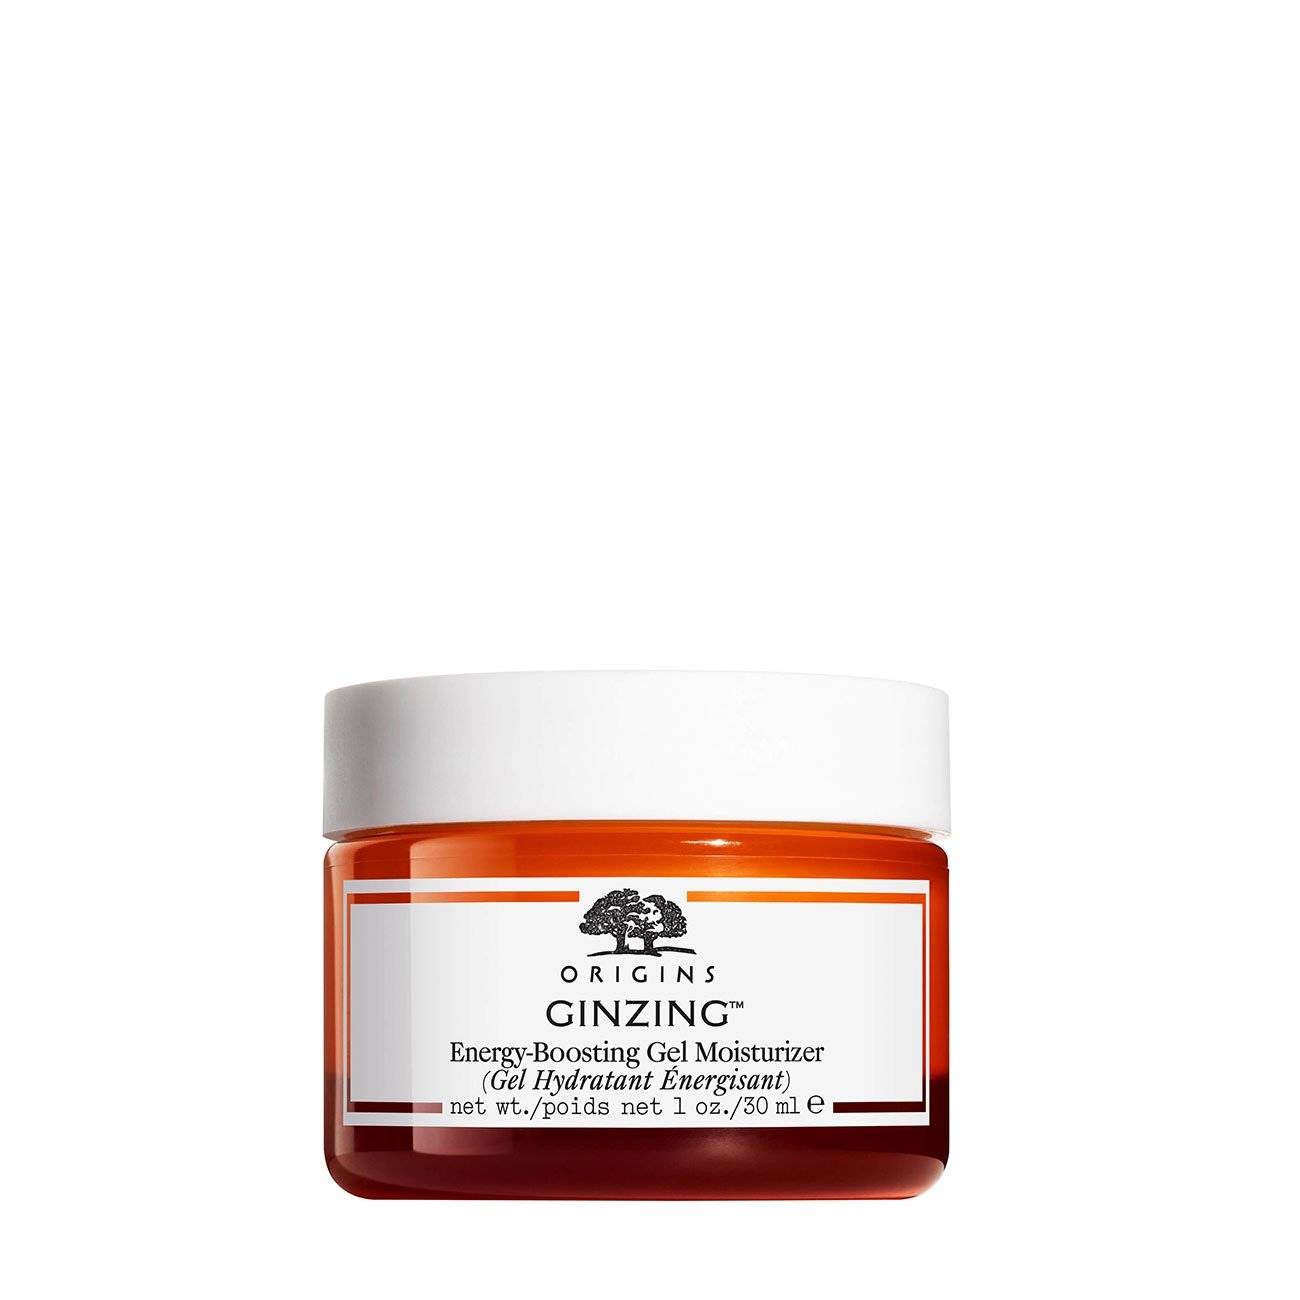 GINZING ENERGY-BOOSTING GEL MOISTURIZER WITH GINSENG AND COFFEE 30 ml and imagine pret reduceri